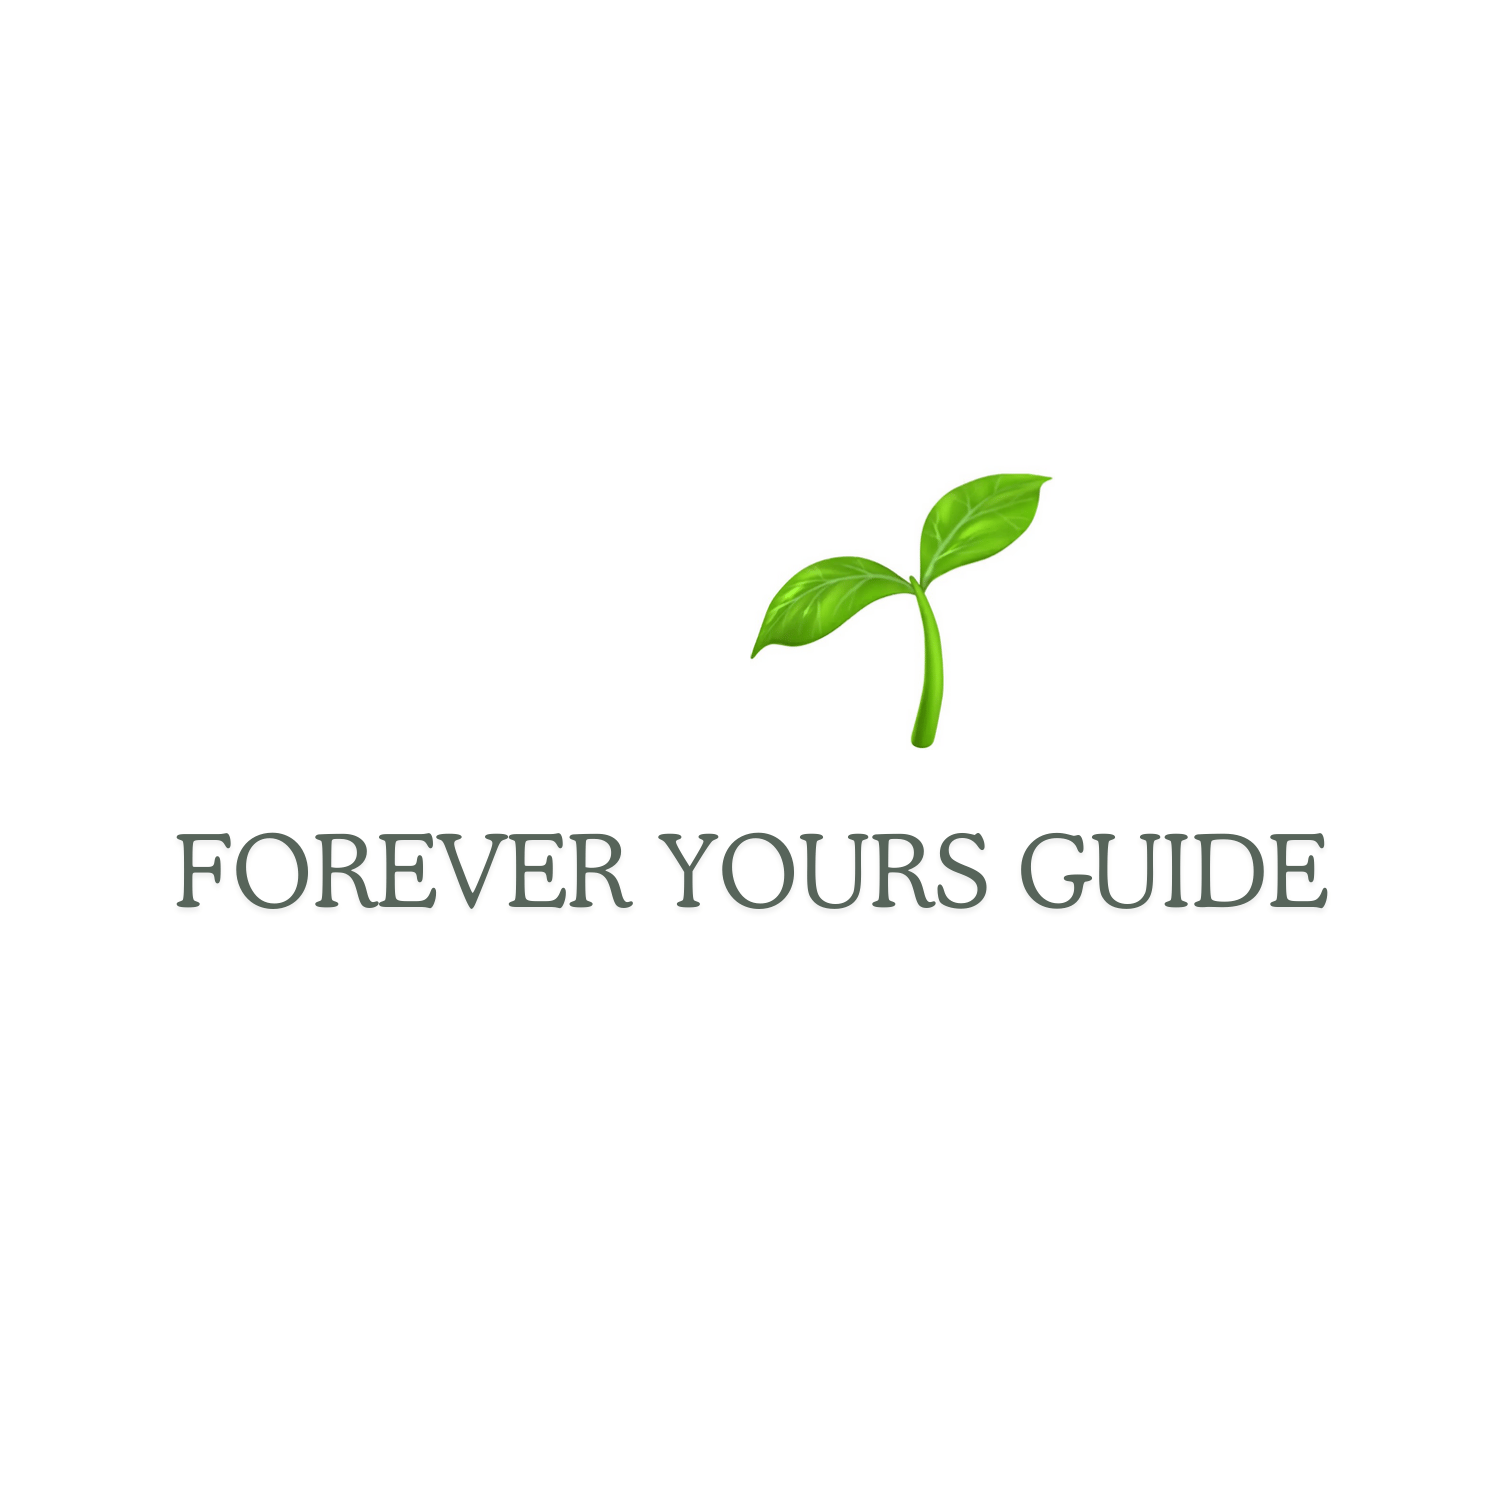 forever yours guide 아바타